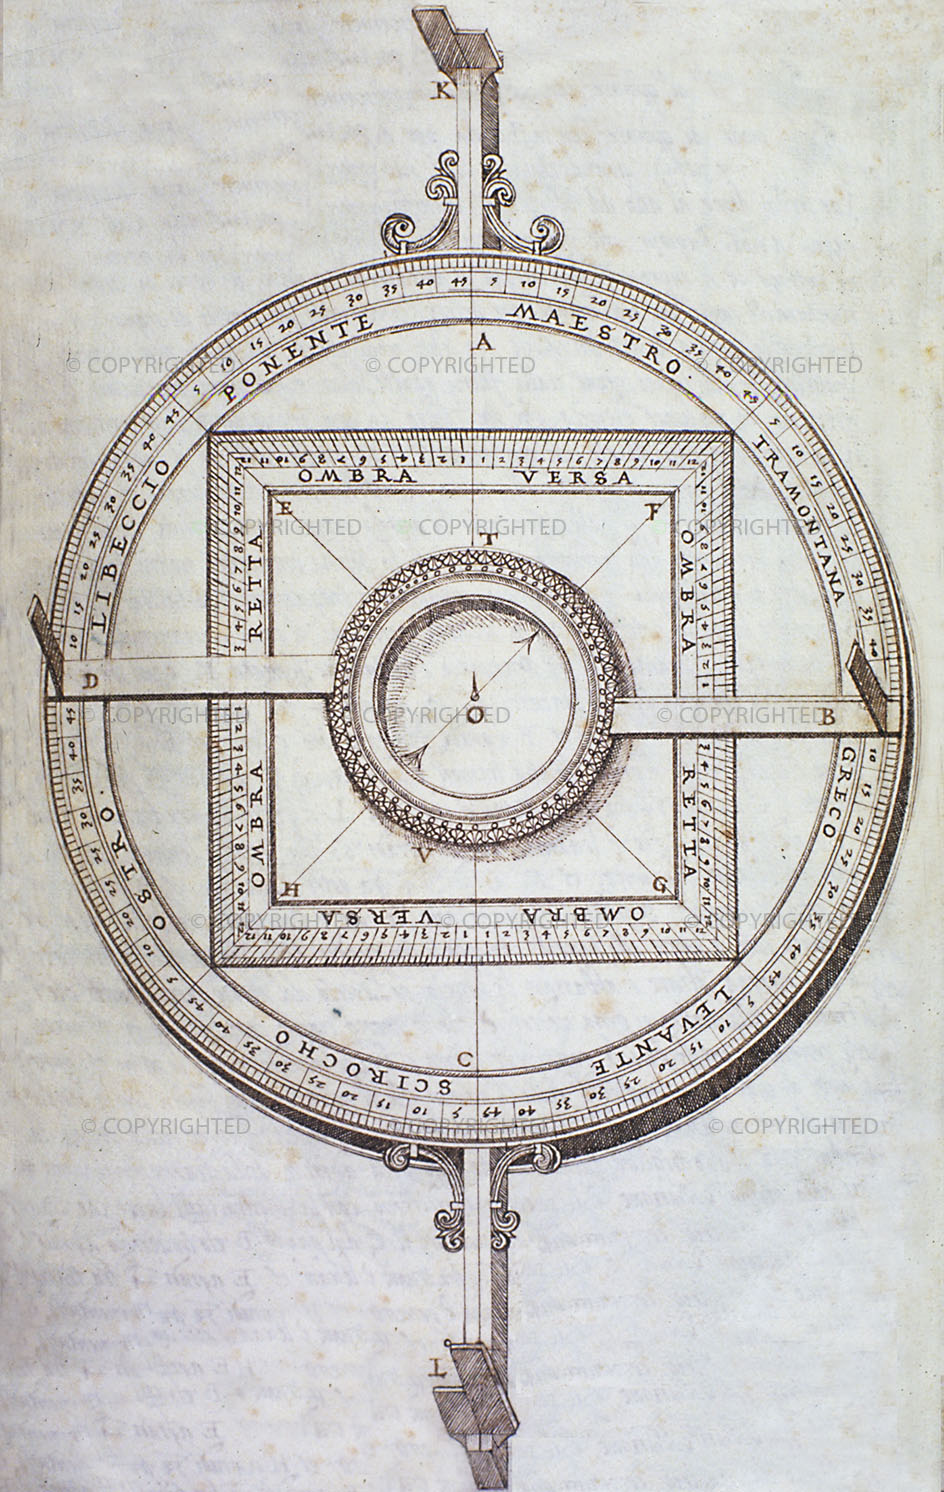 Surveying (or azimuth) compass